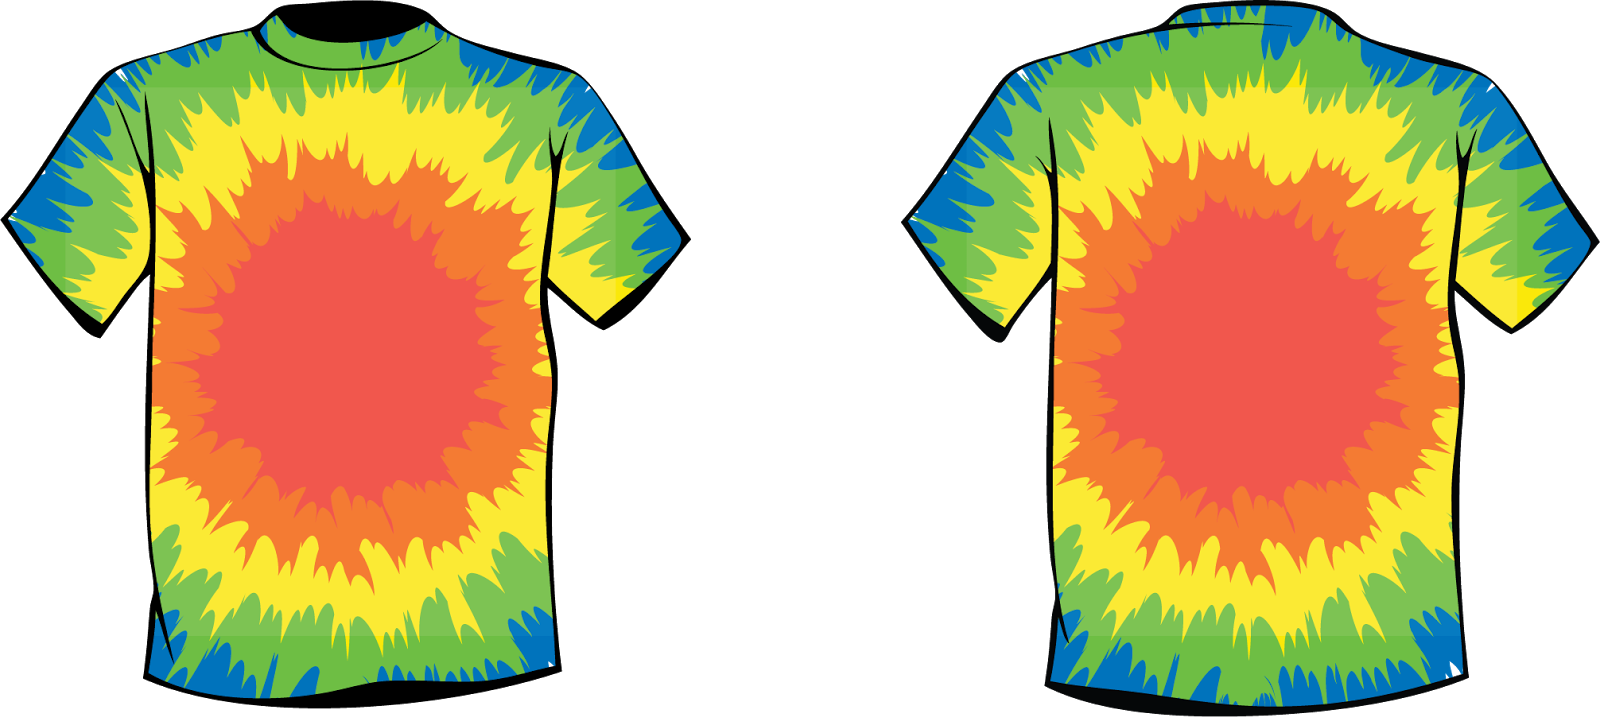 Free Tie Dye Clipart, Download Free Tie Dye Clipart png images, Free